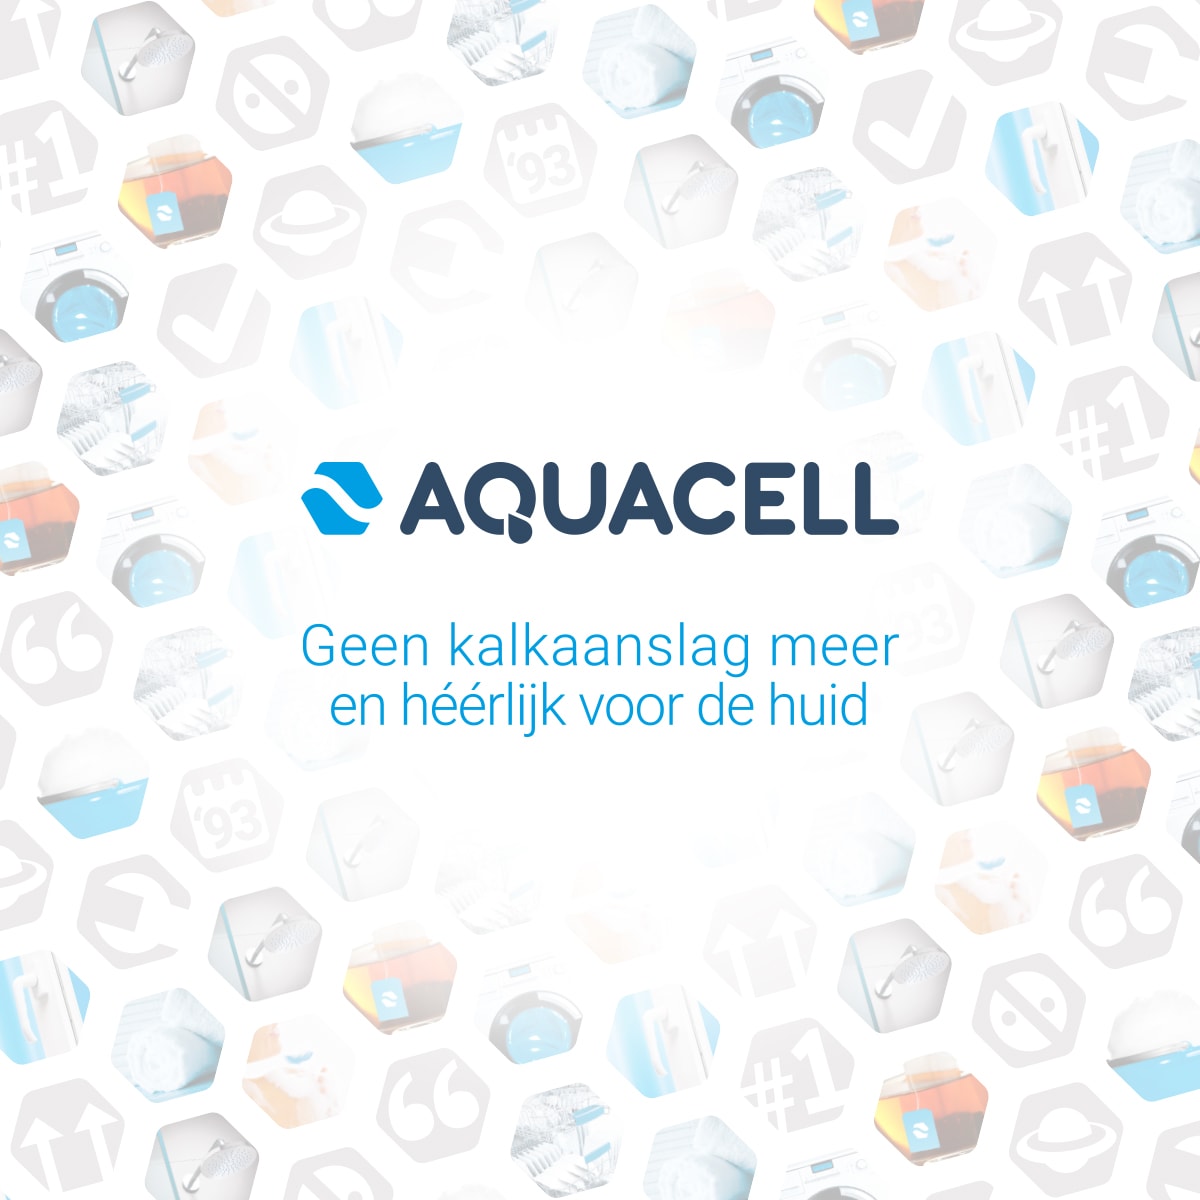 (c) Aquacell-waterontharder.nl